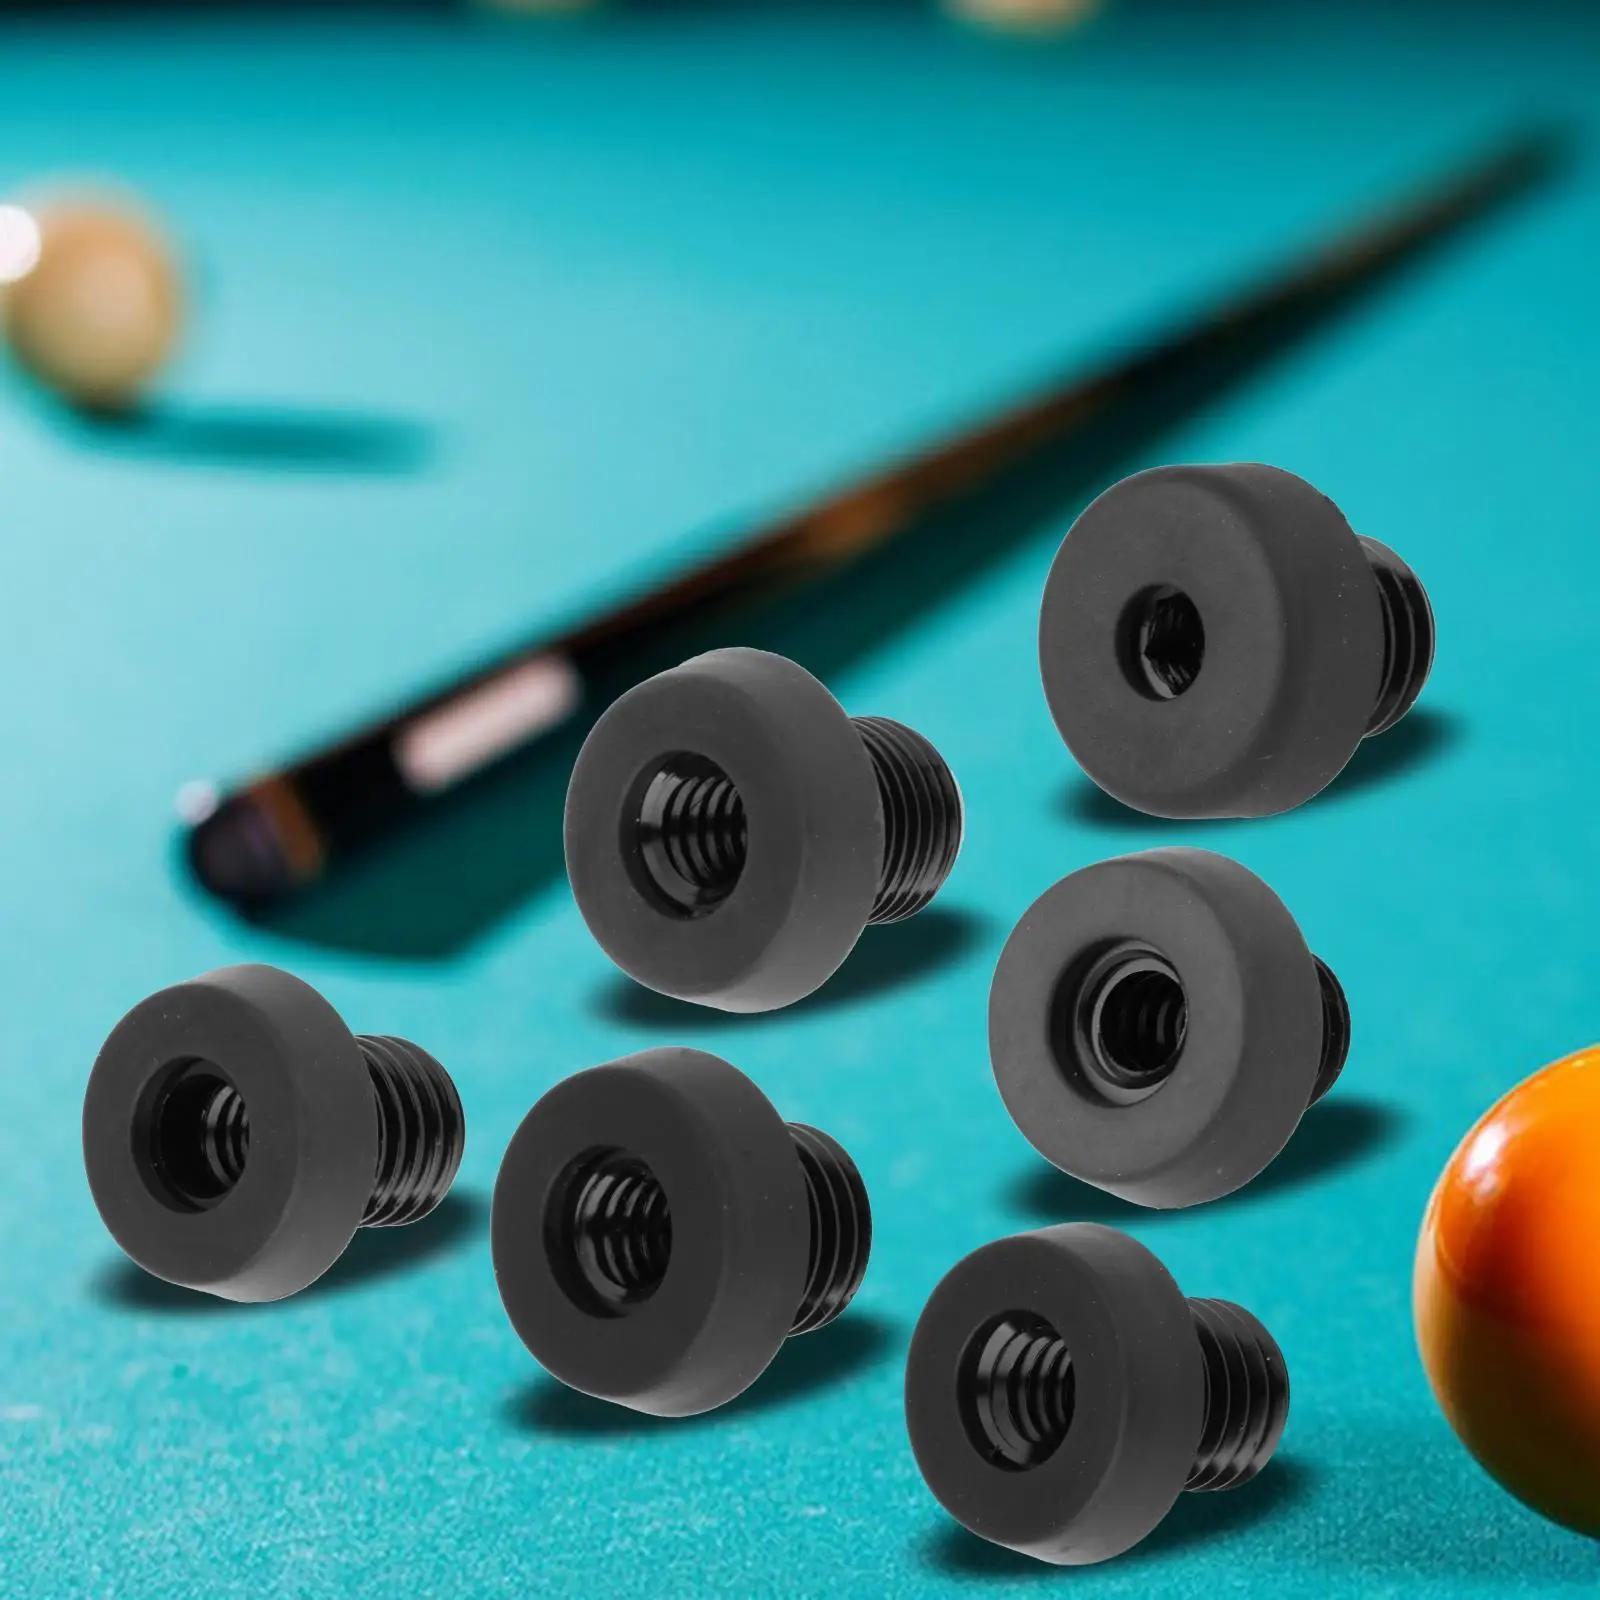 Billiard Bottom Plug Connected Extension Fall Protection Convenient Billiard Bumper for Playing Clubs Most Pool Cues Pool Table